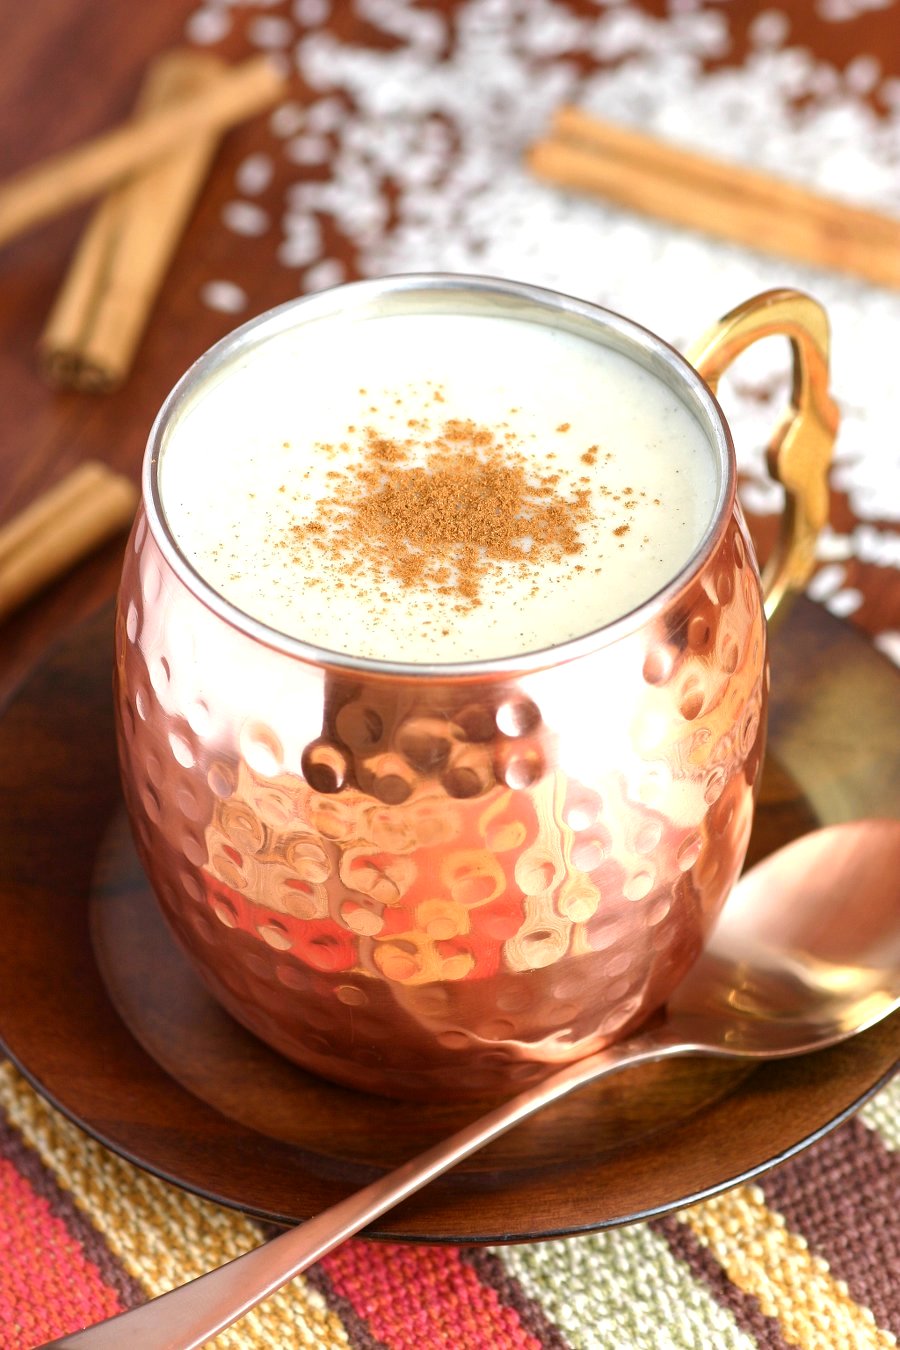 This Mexican Sweet Rice Drink (Atole de Arroz) is a creamy cinnamon and vanilla-infused hot beverage with a porridge-like consistency that's perfect cold weather days.